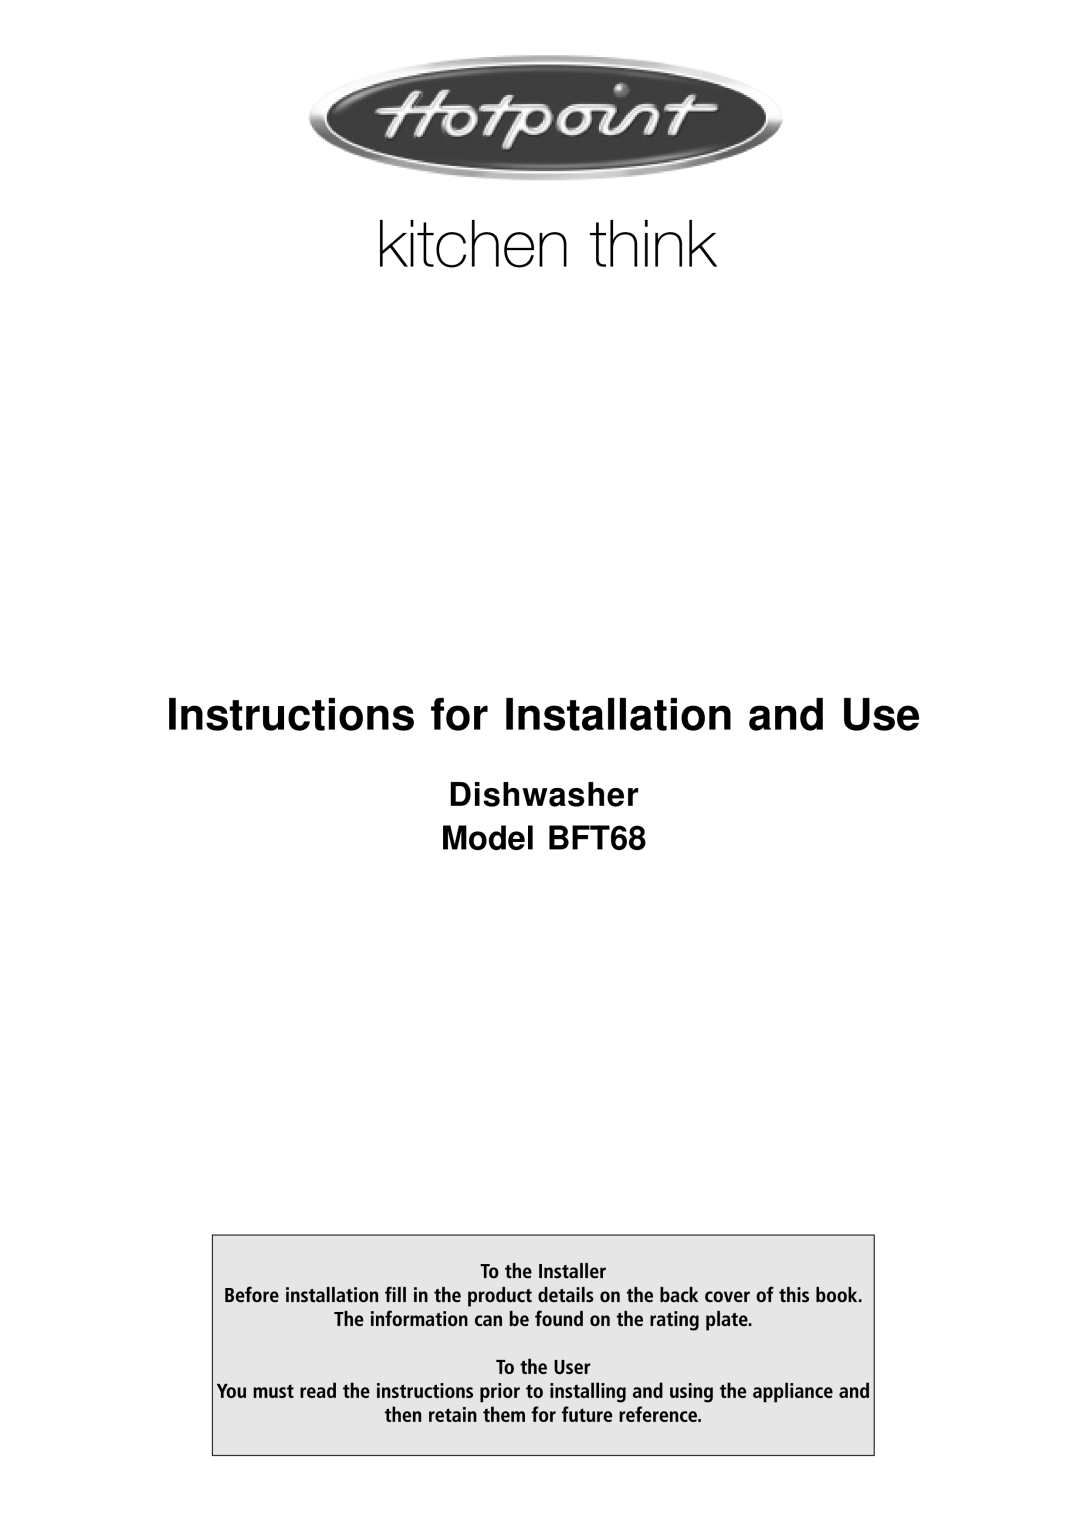 Hotpoint manual Instructions for Installation and Use, Dishwasher Model BFT68 